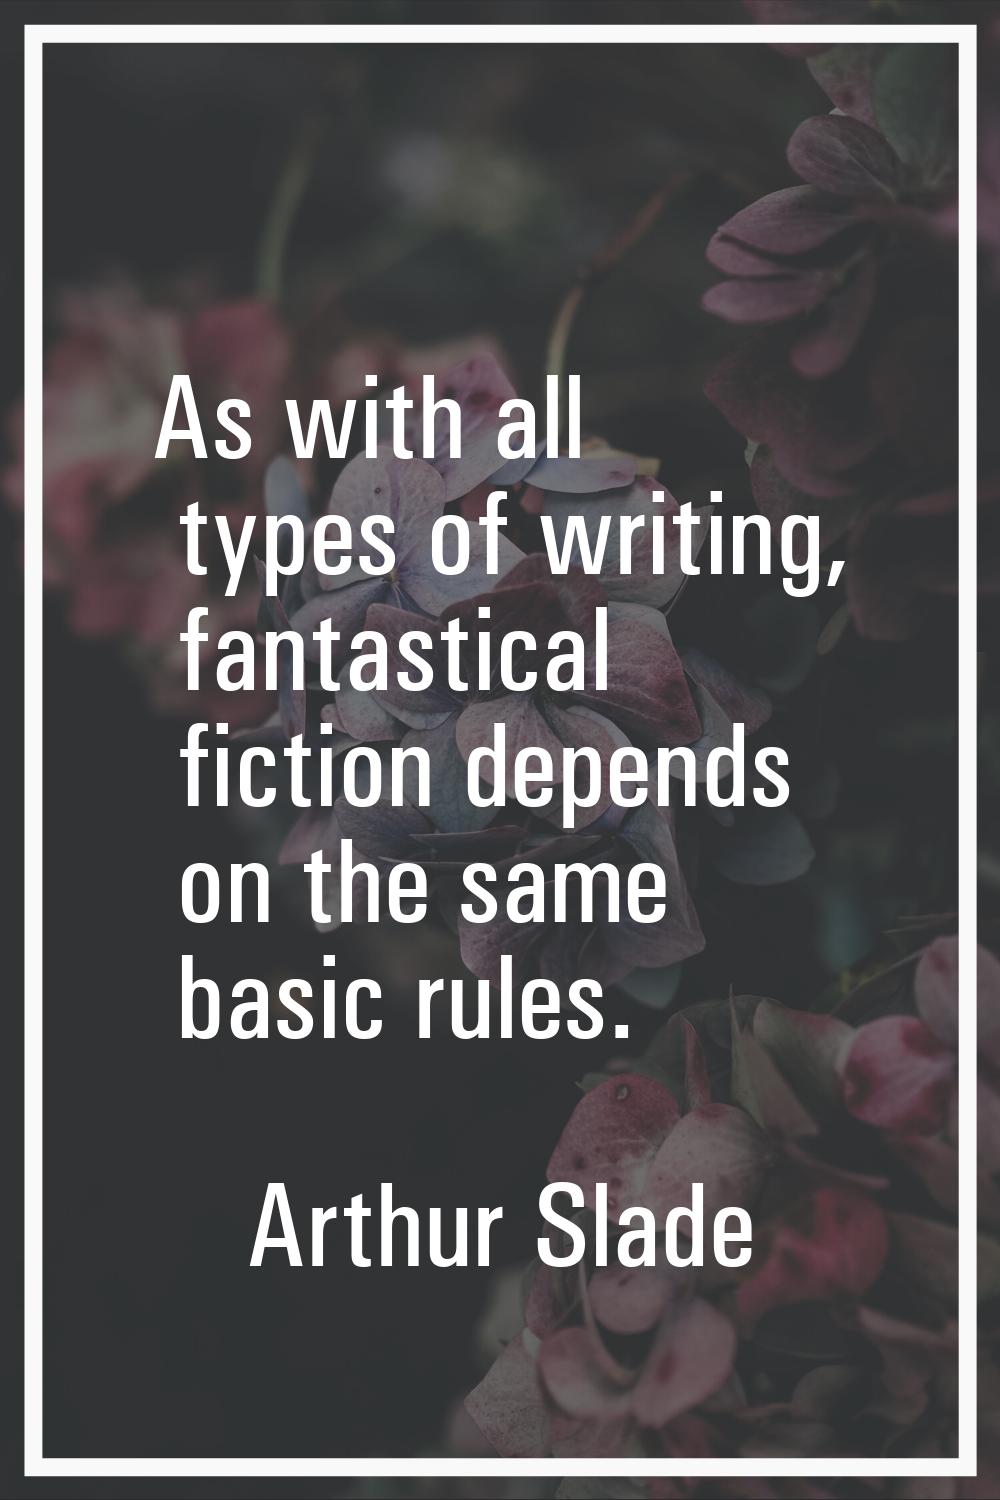 As with all types of writing, fantastical fiction depends on the same basic rules.